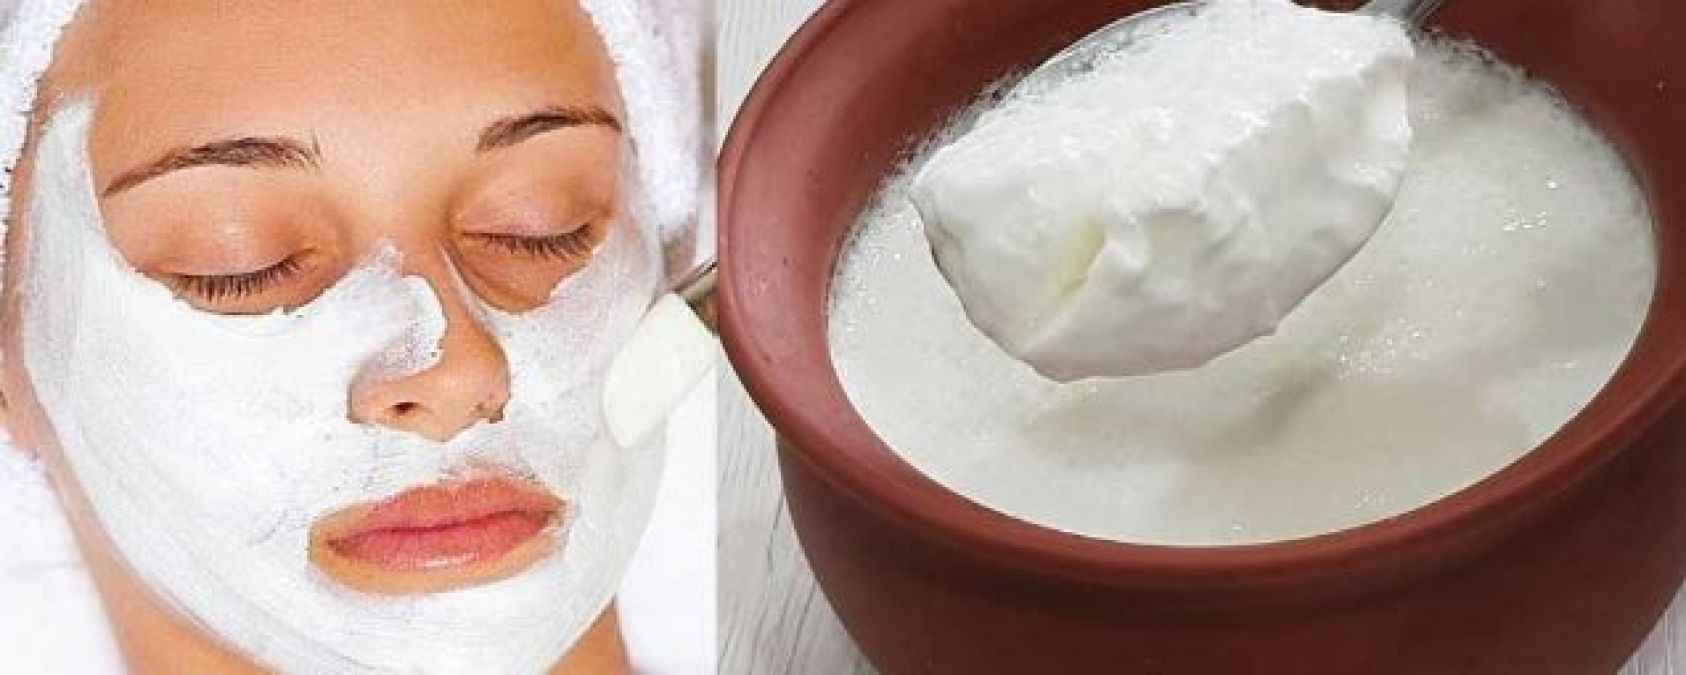 This mask made from curd made to remove wrinkles on the skin